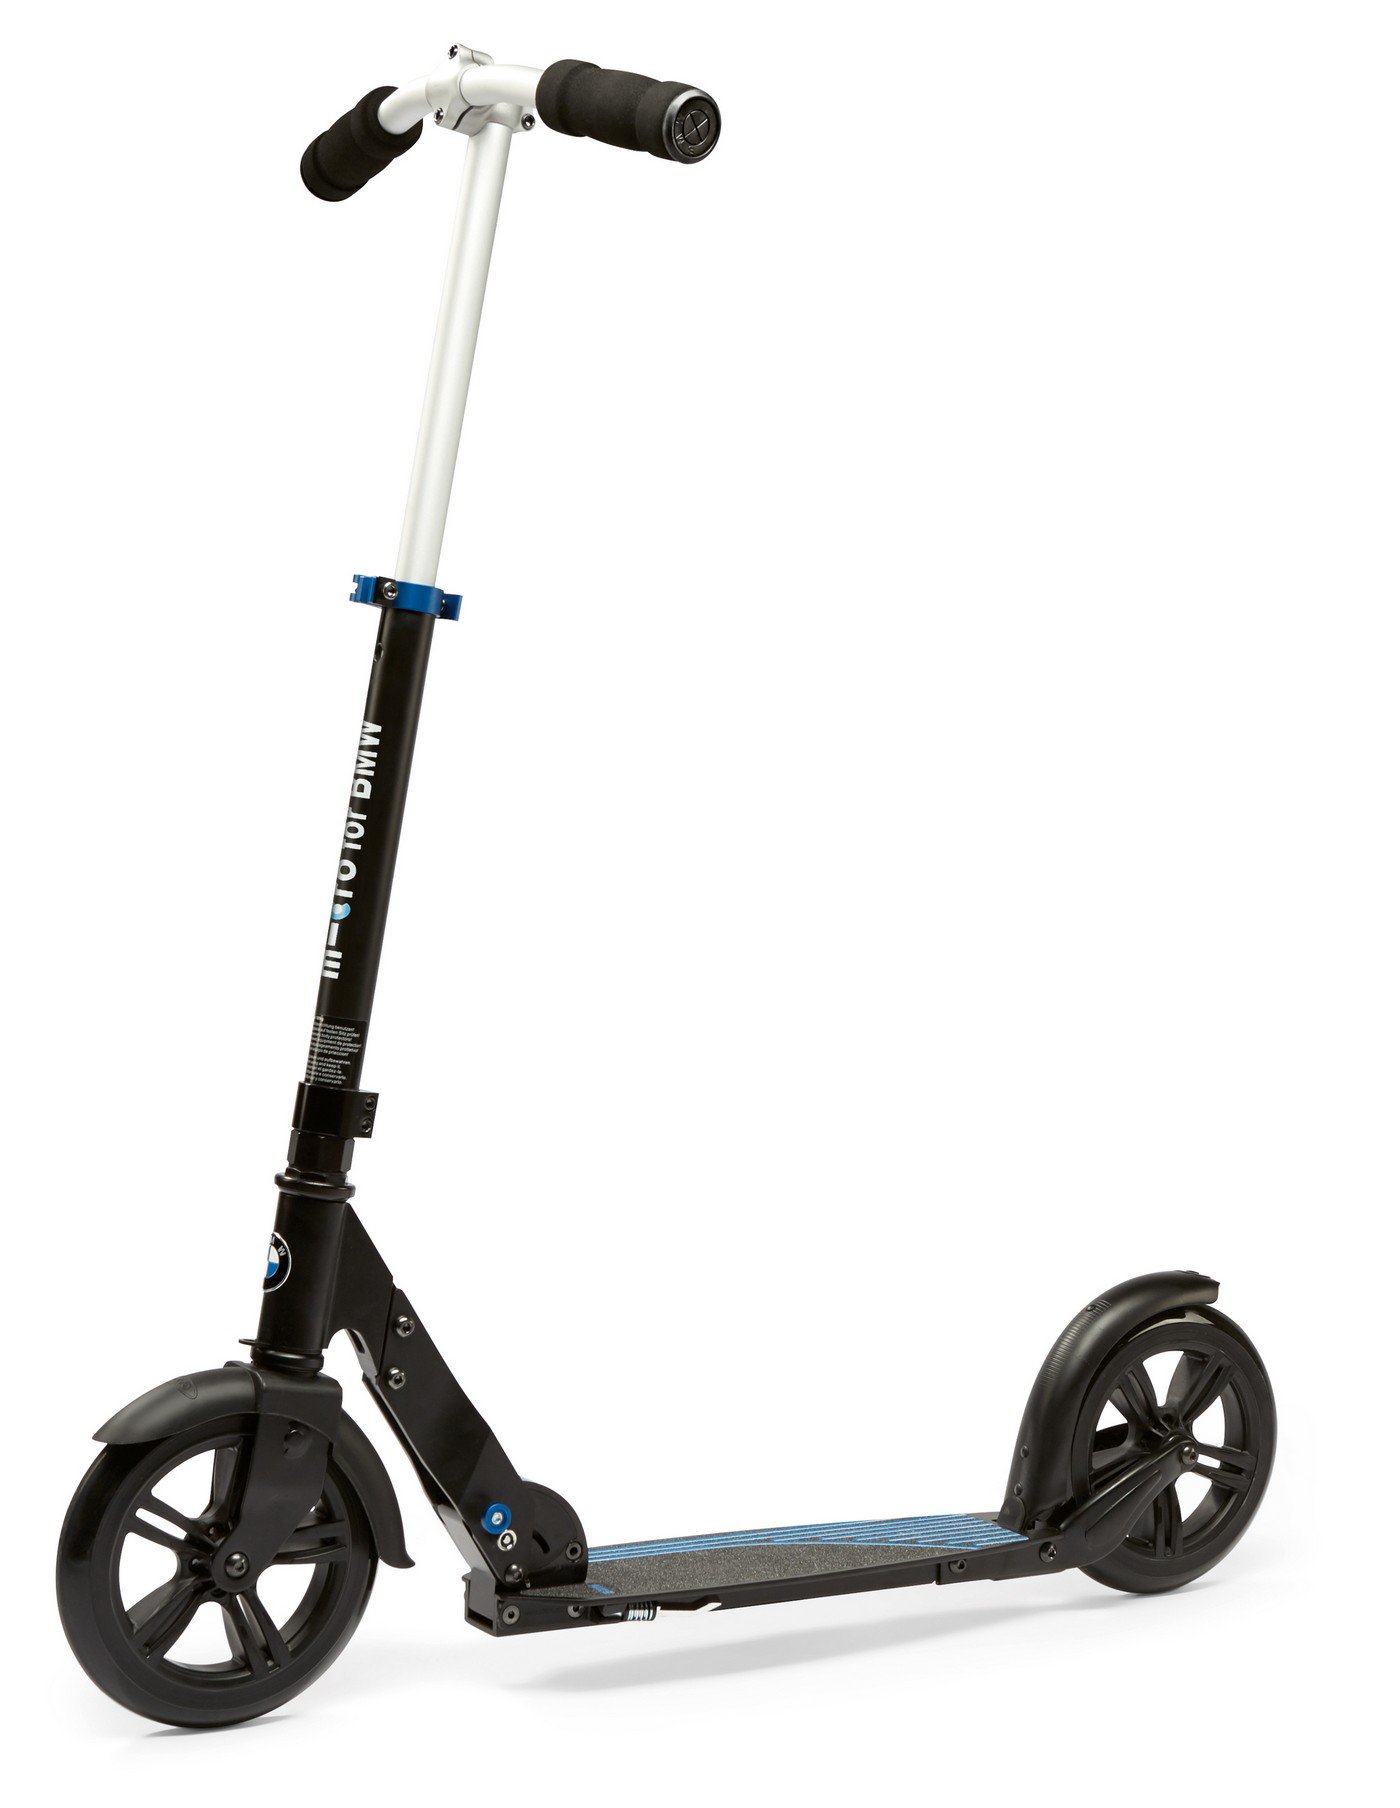 BMW ventures into personal mobility launches its a sleek electric scooter - Luxurylaunches